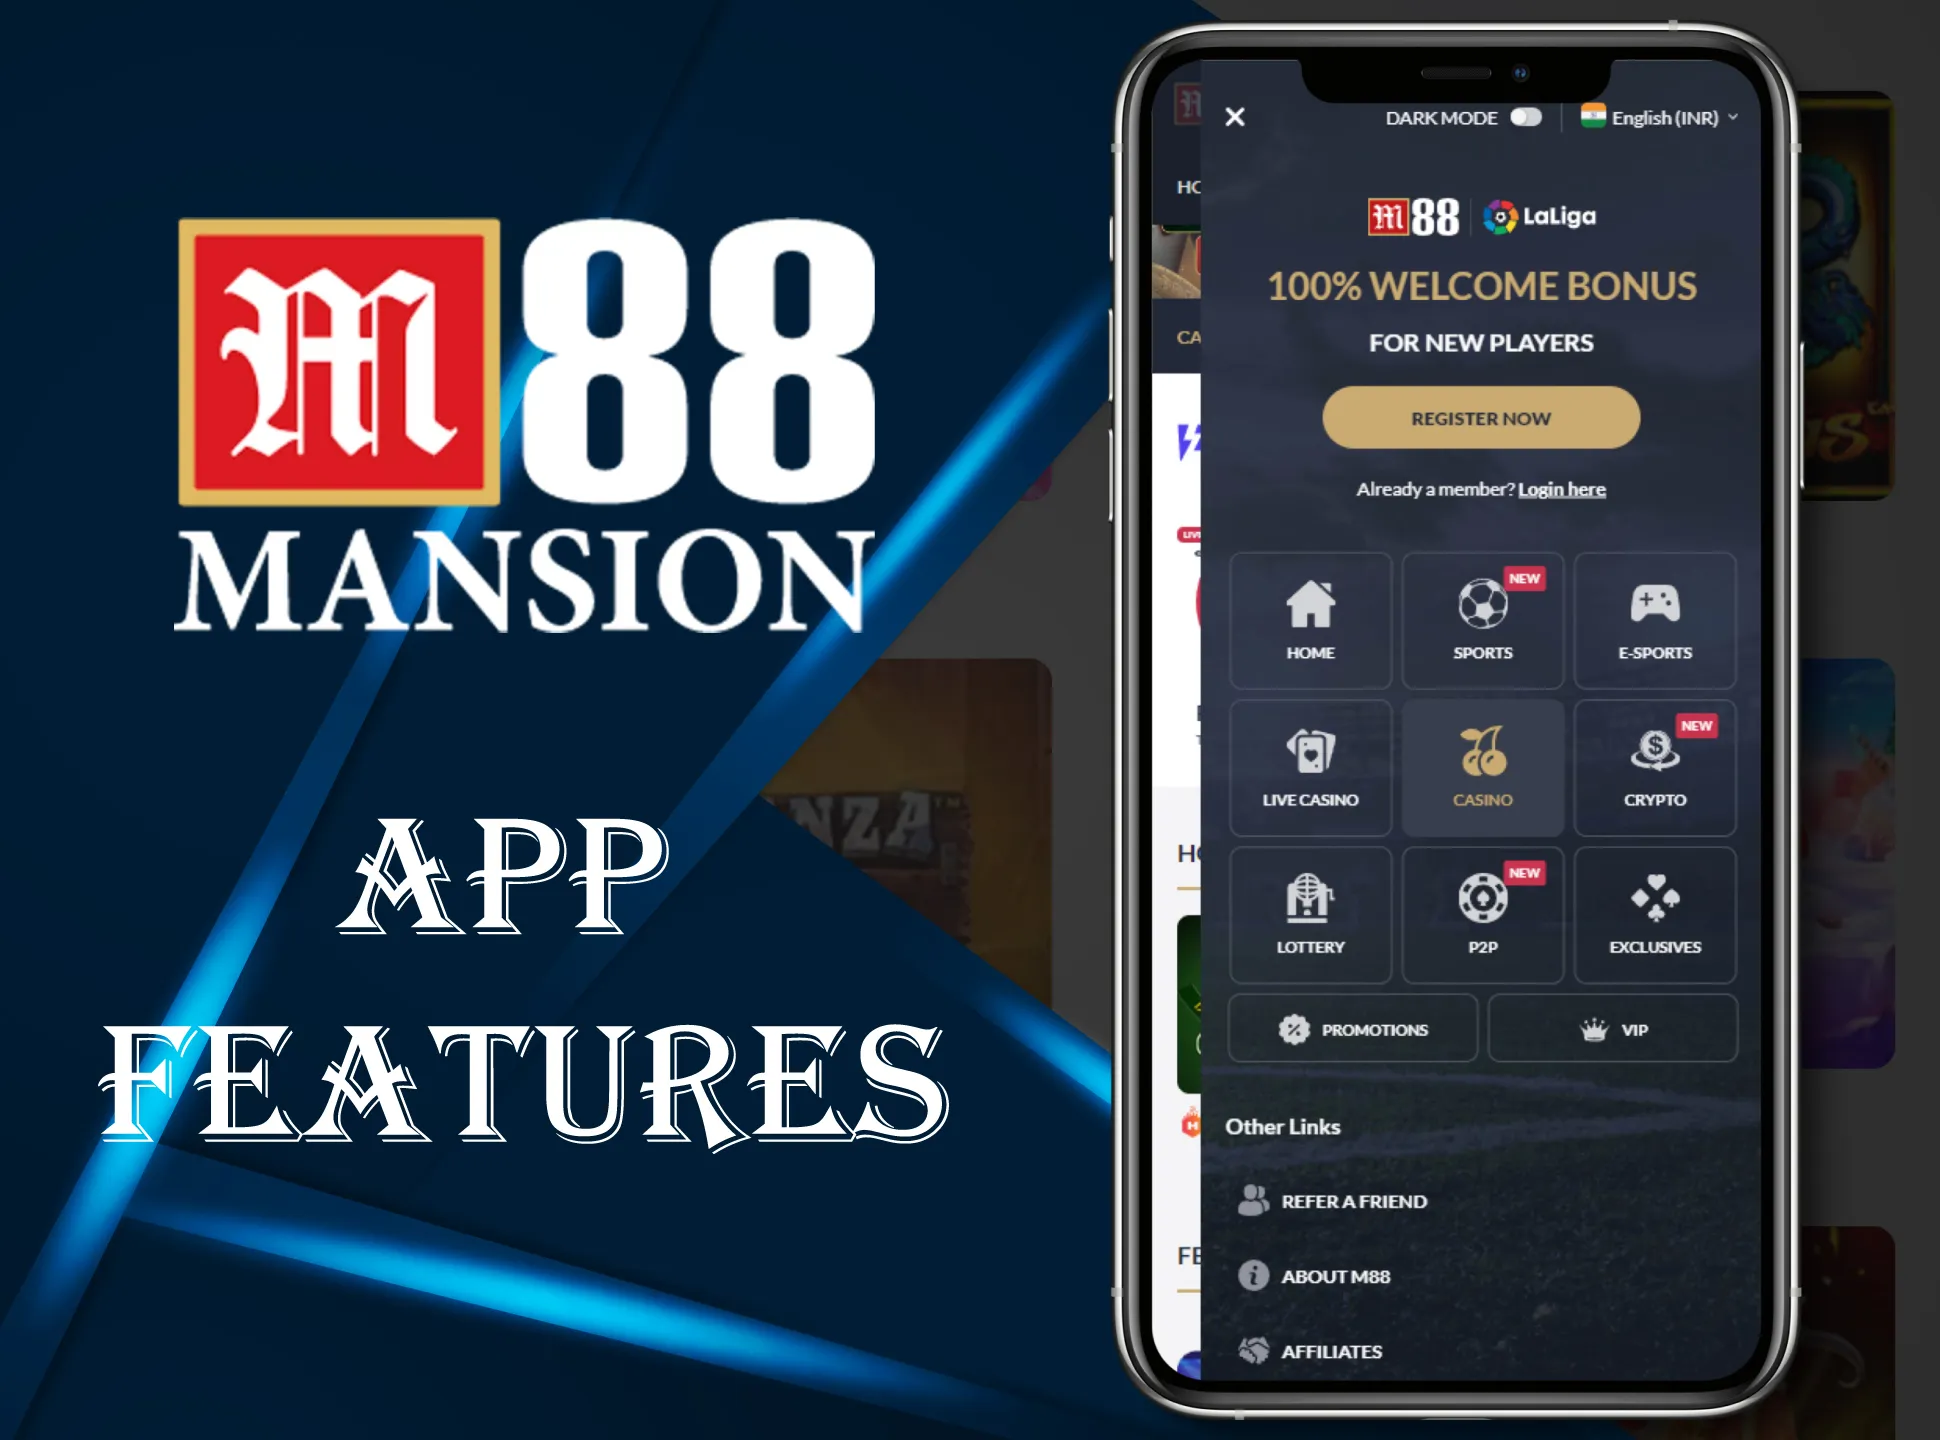 Learn more abount M88 app features.